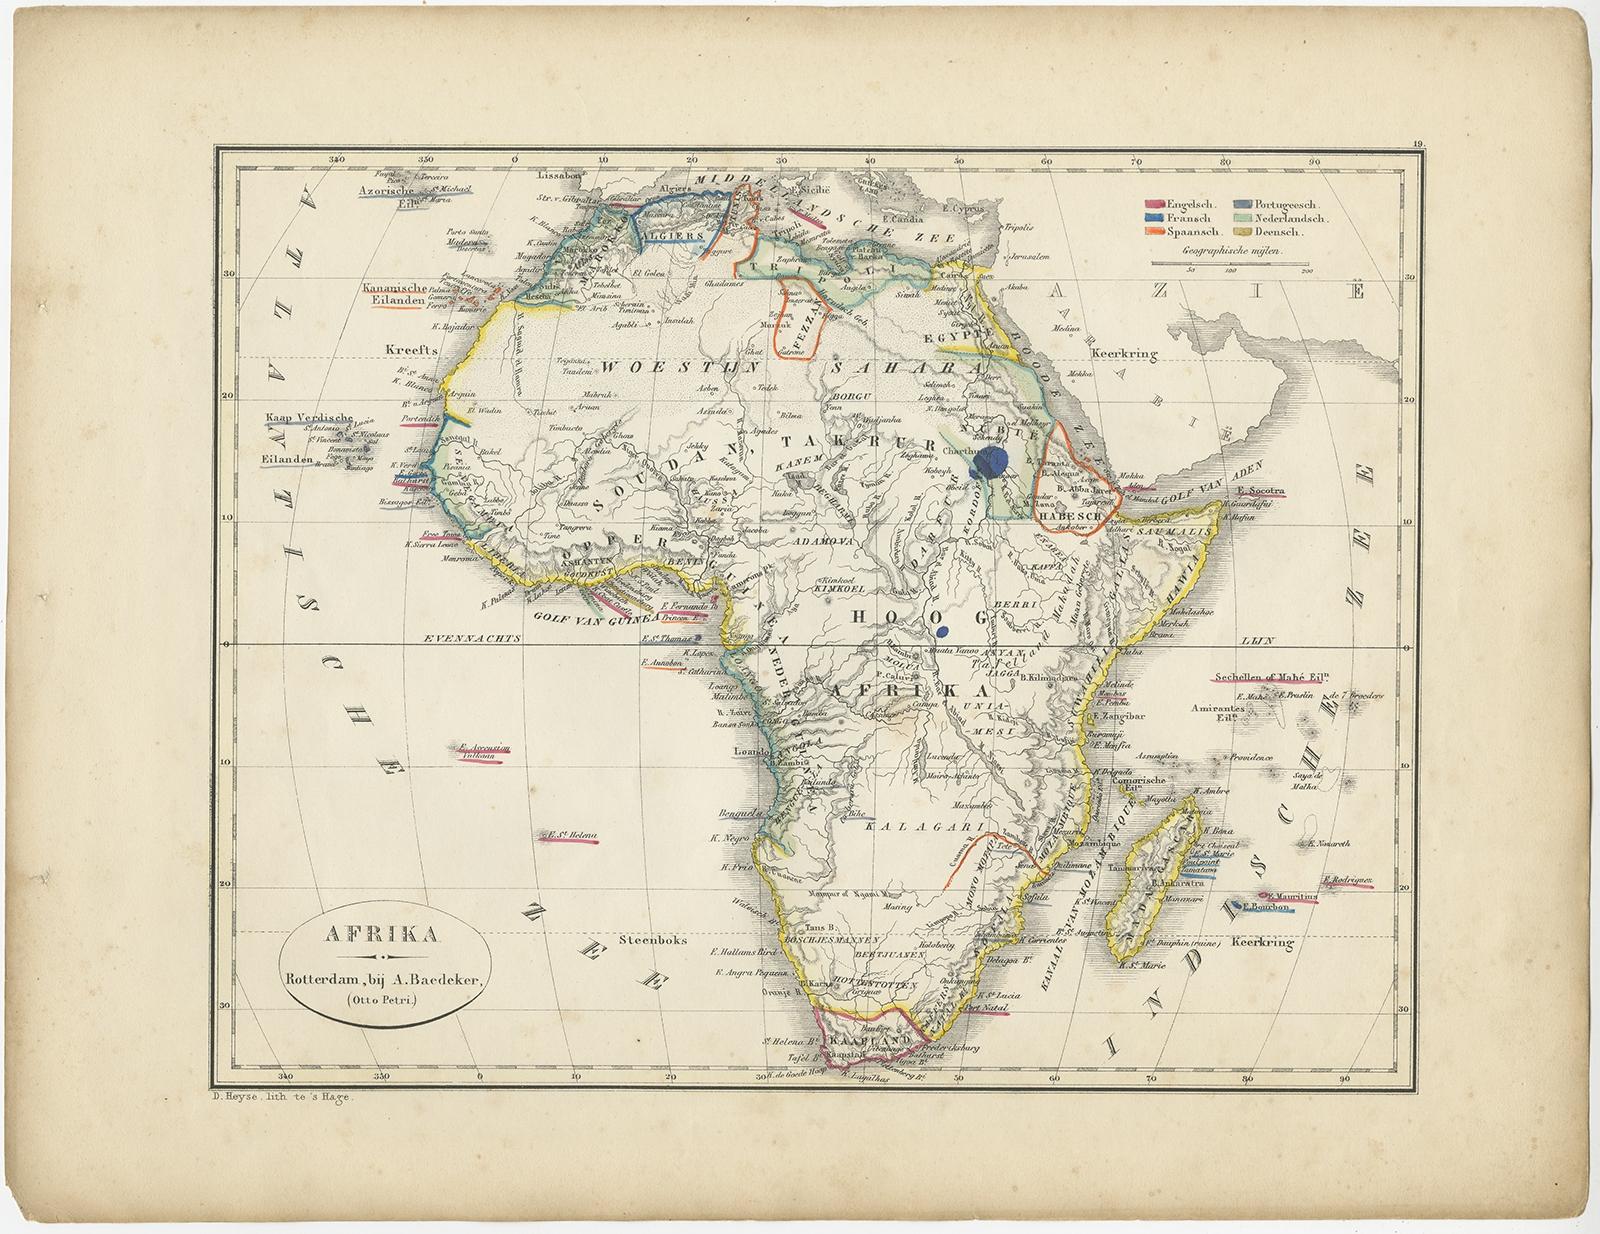 Antique map titled 'Afrika'. Map of Africa. This map originates from 'School-Atlas van alle deelen der Aarde' by Otto Petri. 

Artists and Engravers: Published by A. Baedeker (Otto Petri).

Condition: Good, general age-related toning. Minor